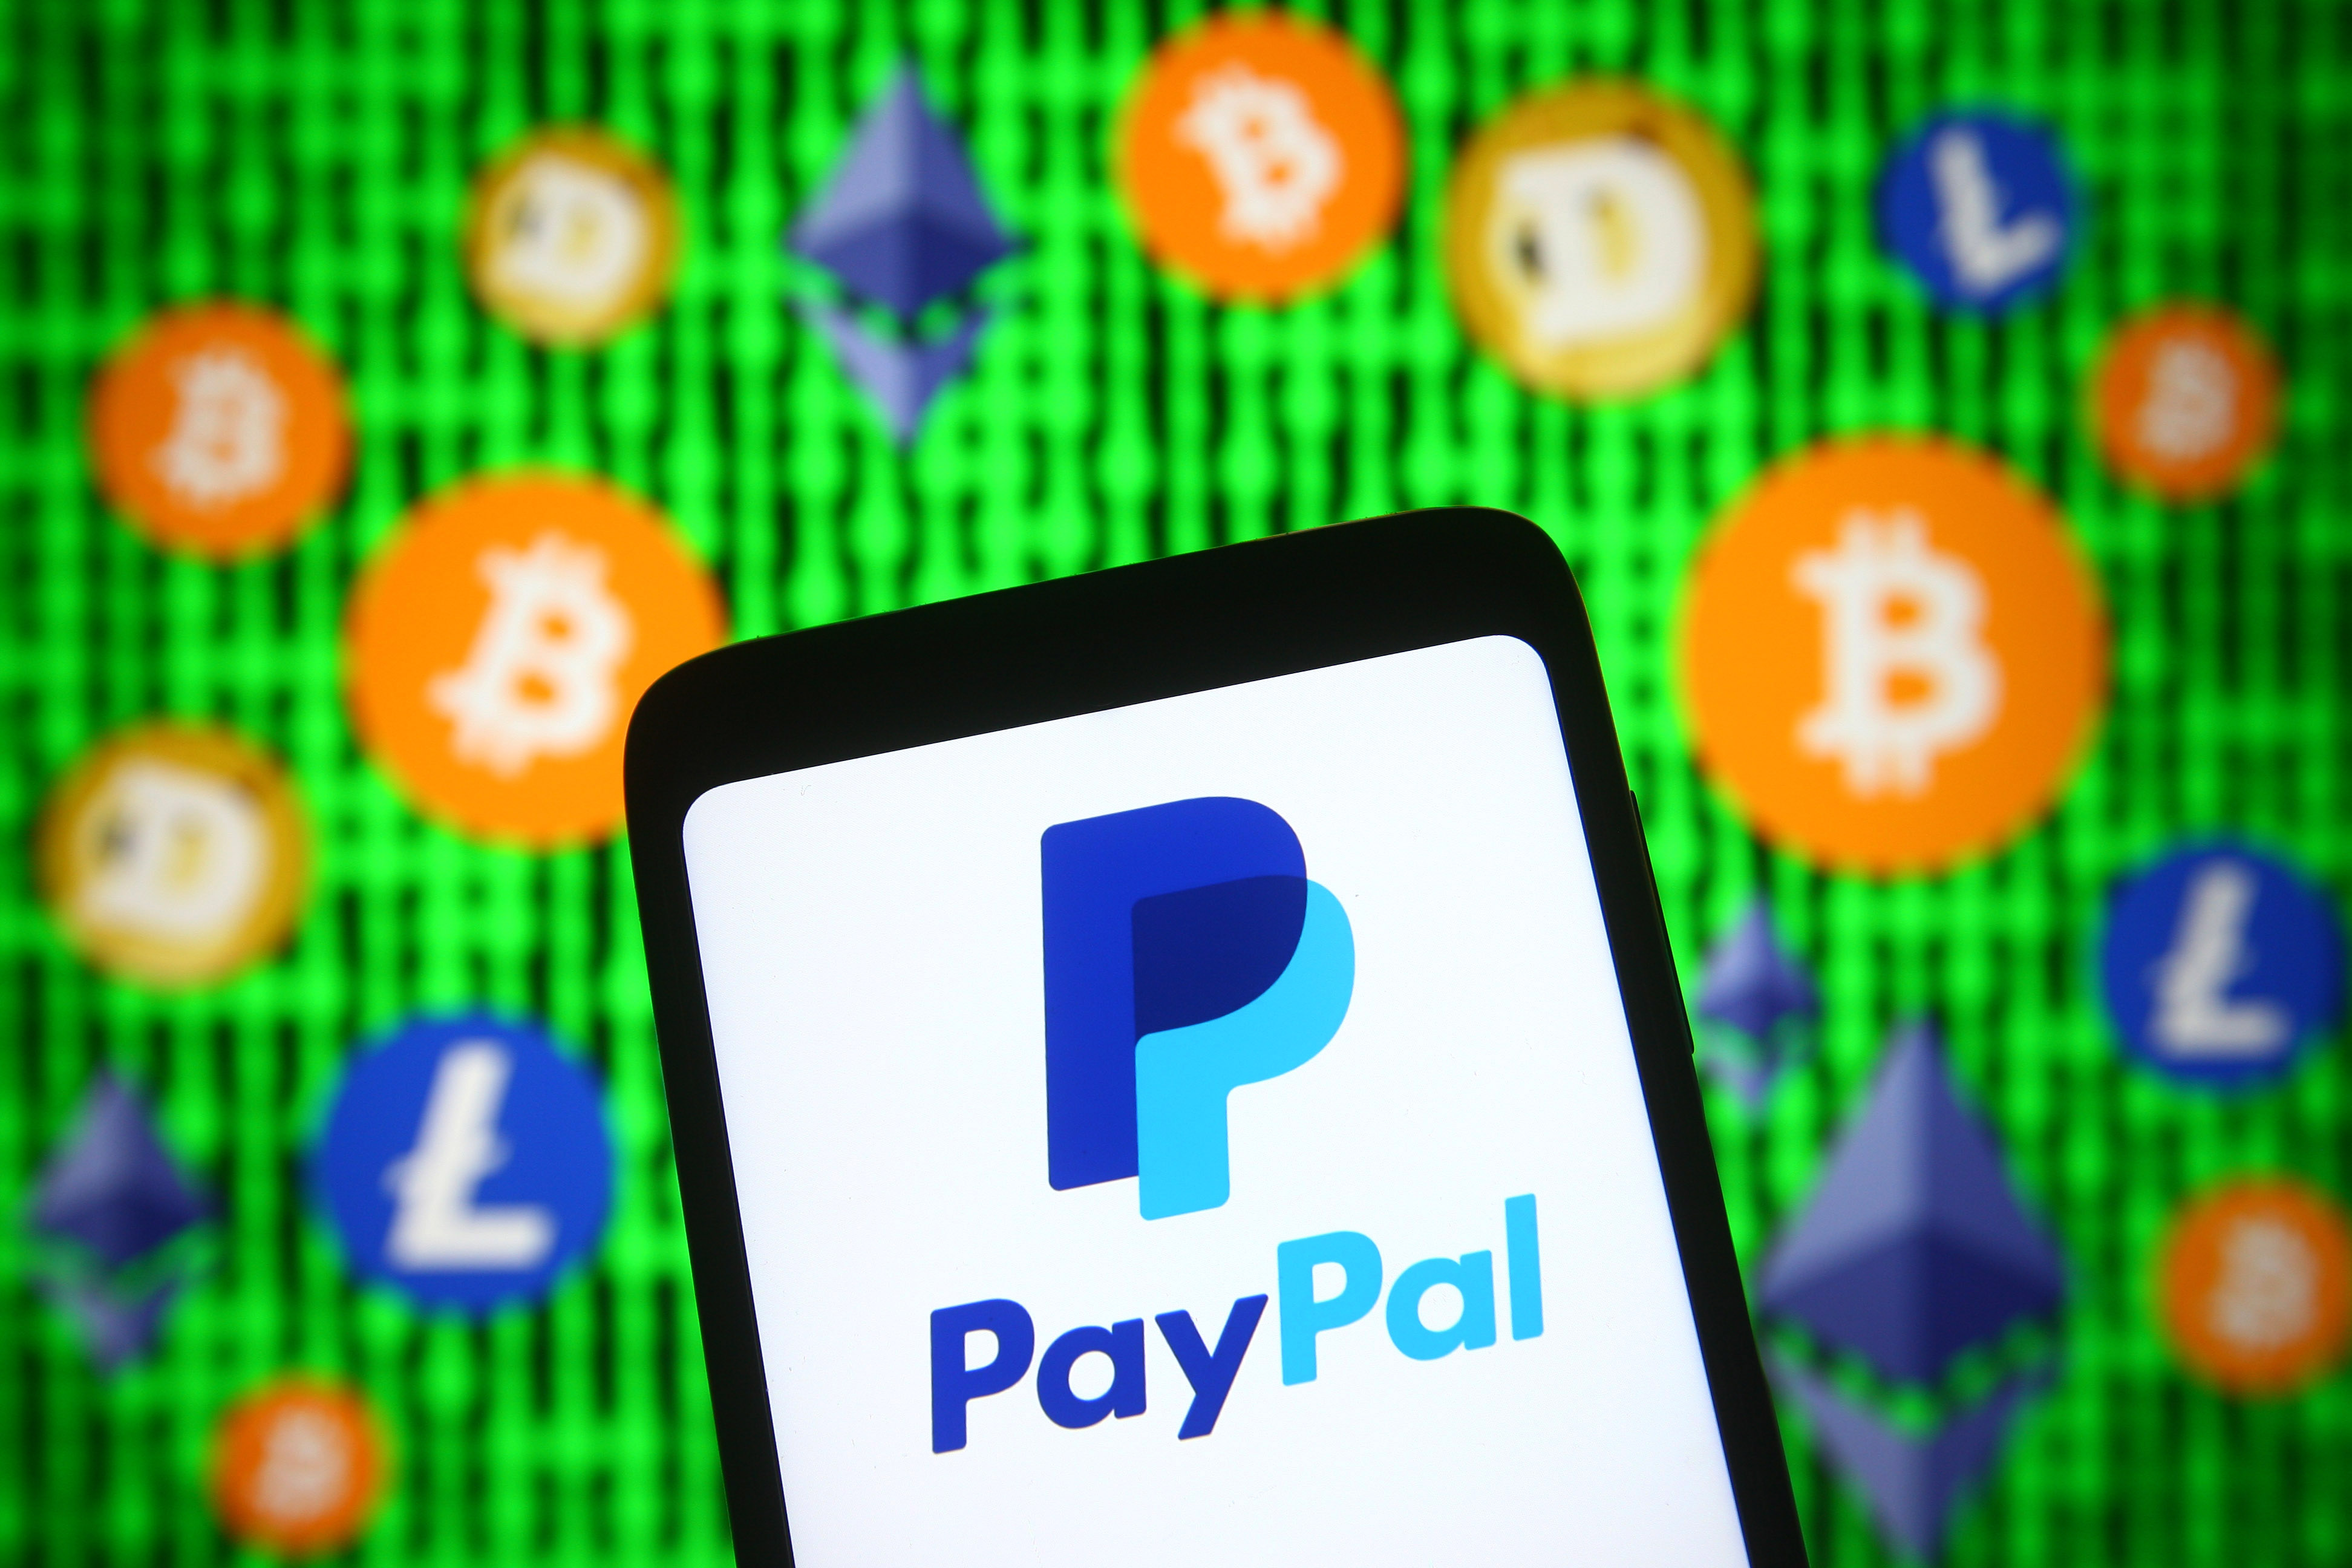 can you transfer paypal crypto to another wallet